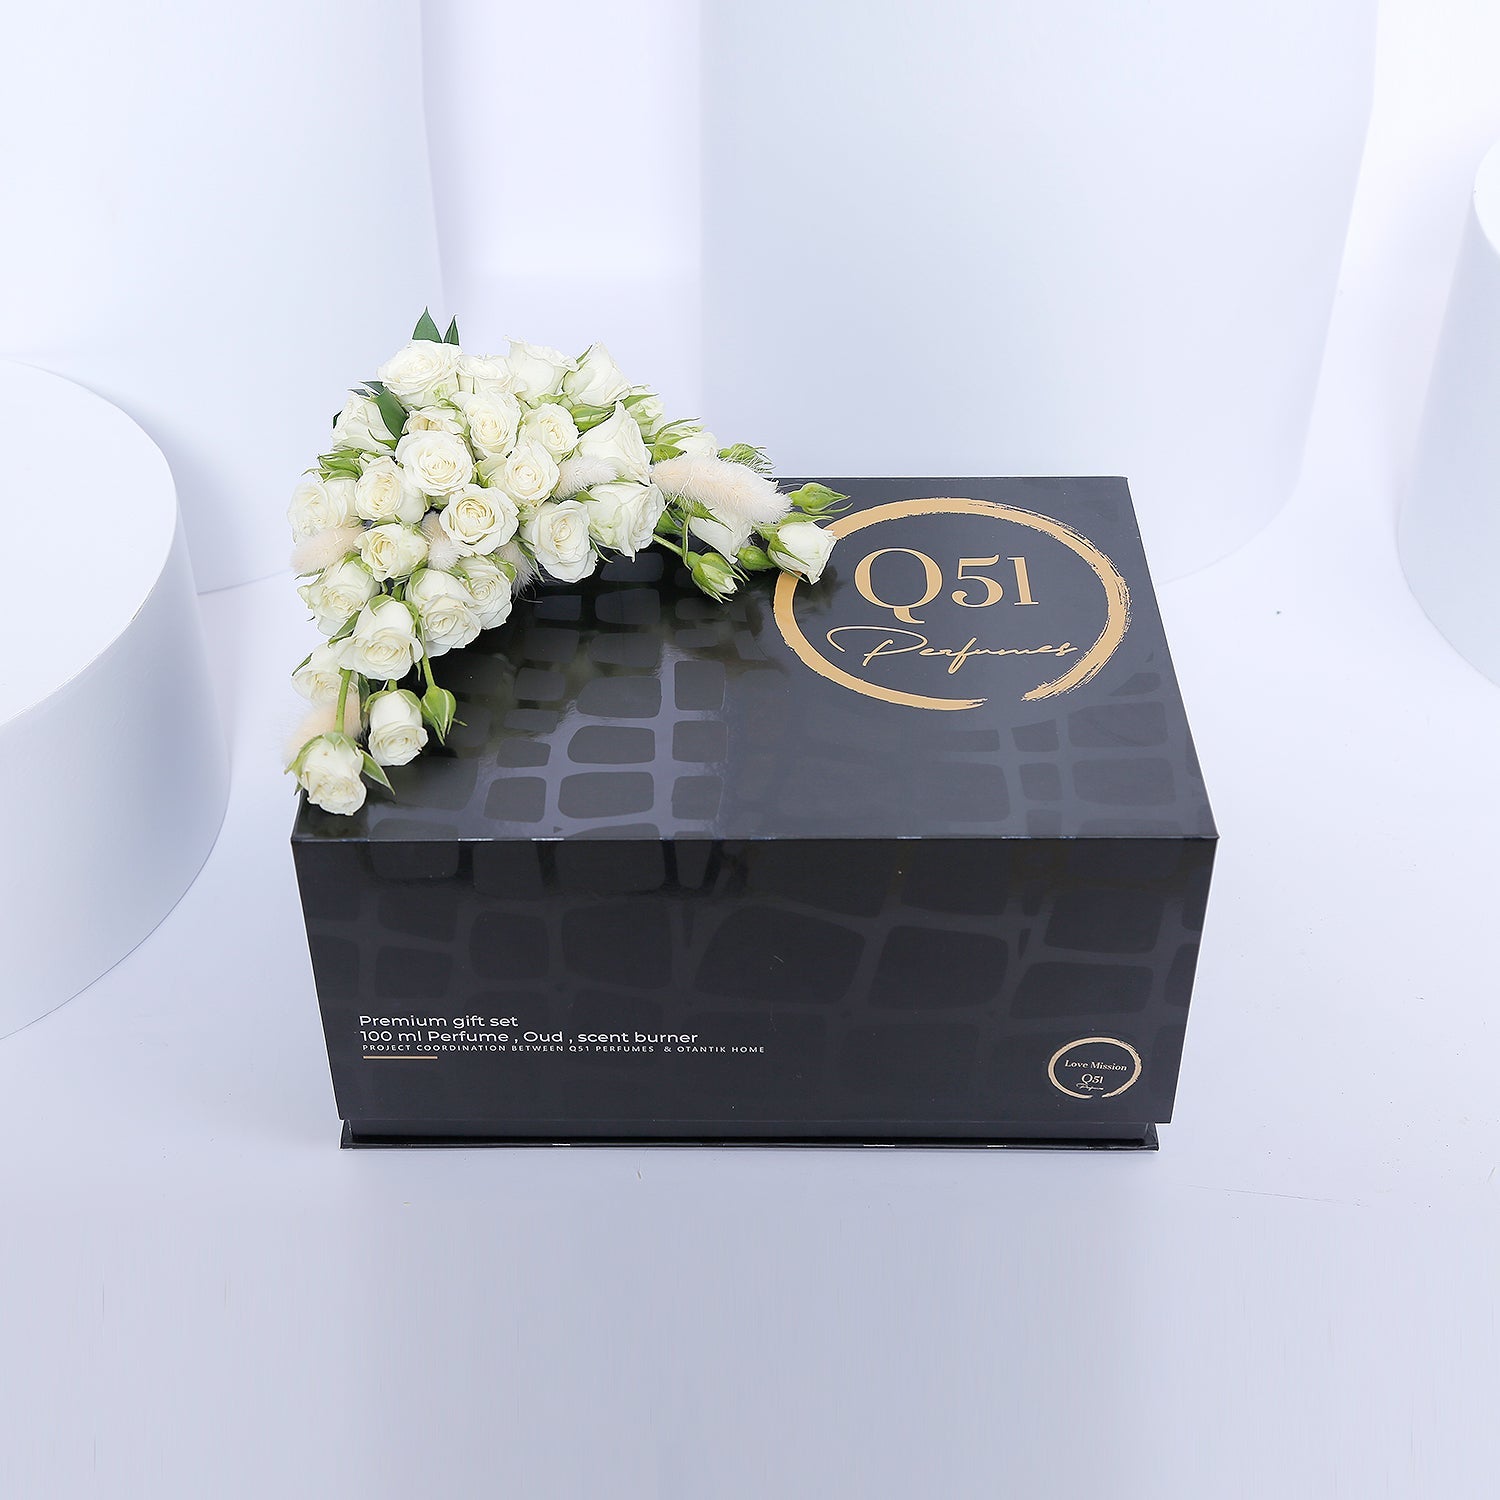 Coffee Incense Burner from Q51 Perfumes